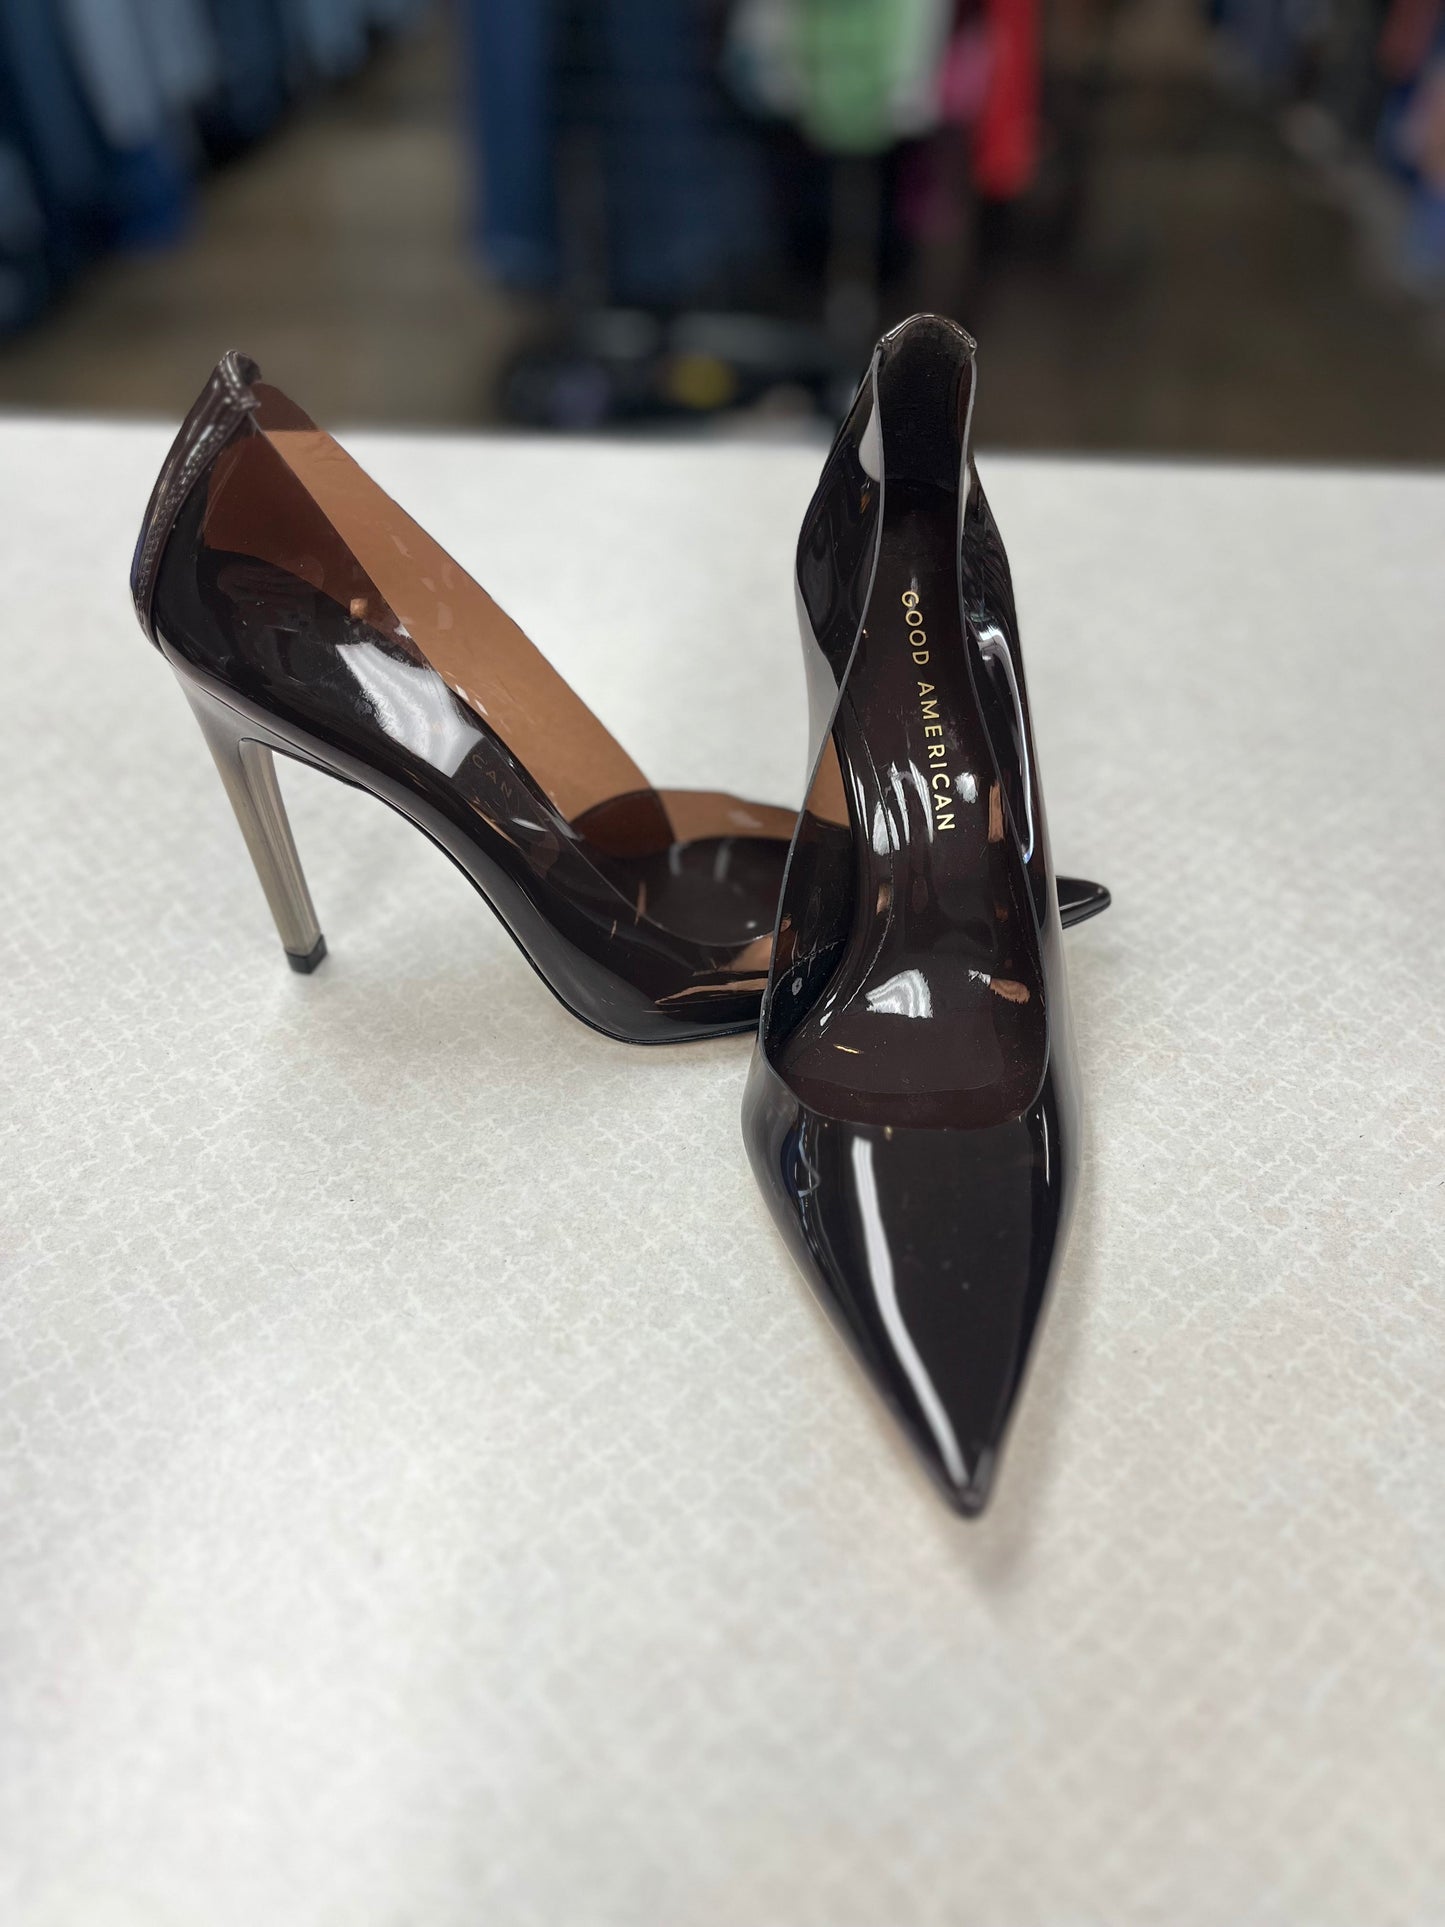 Brown Shoes Heels Stiletto Good American, Size 5.5